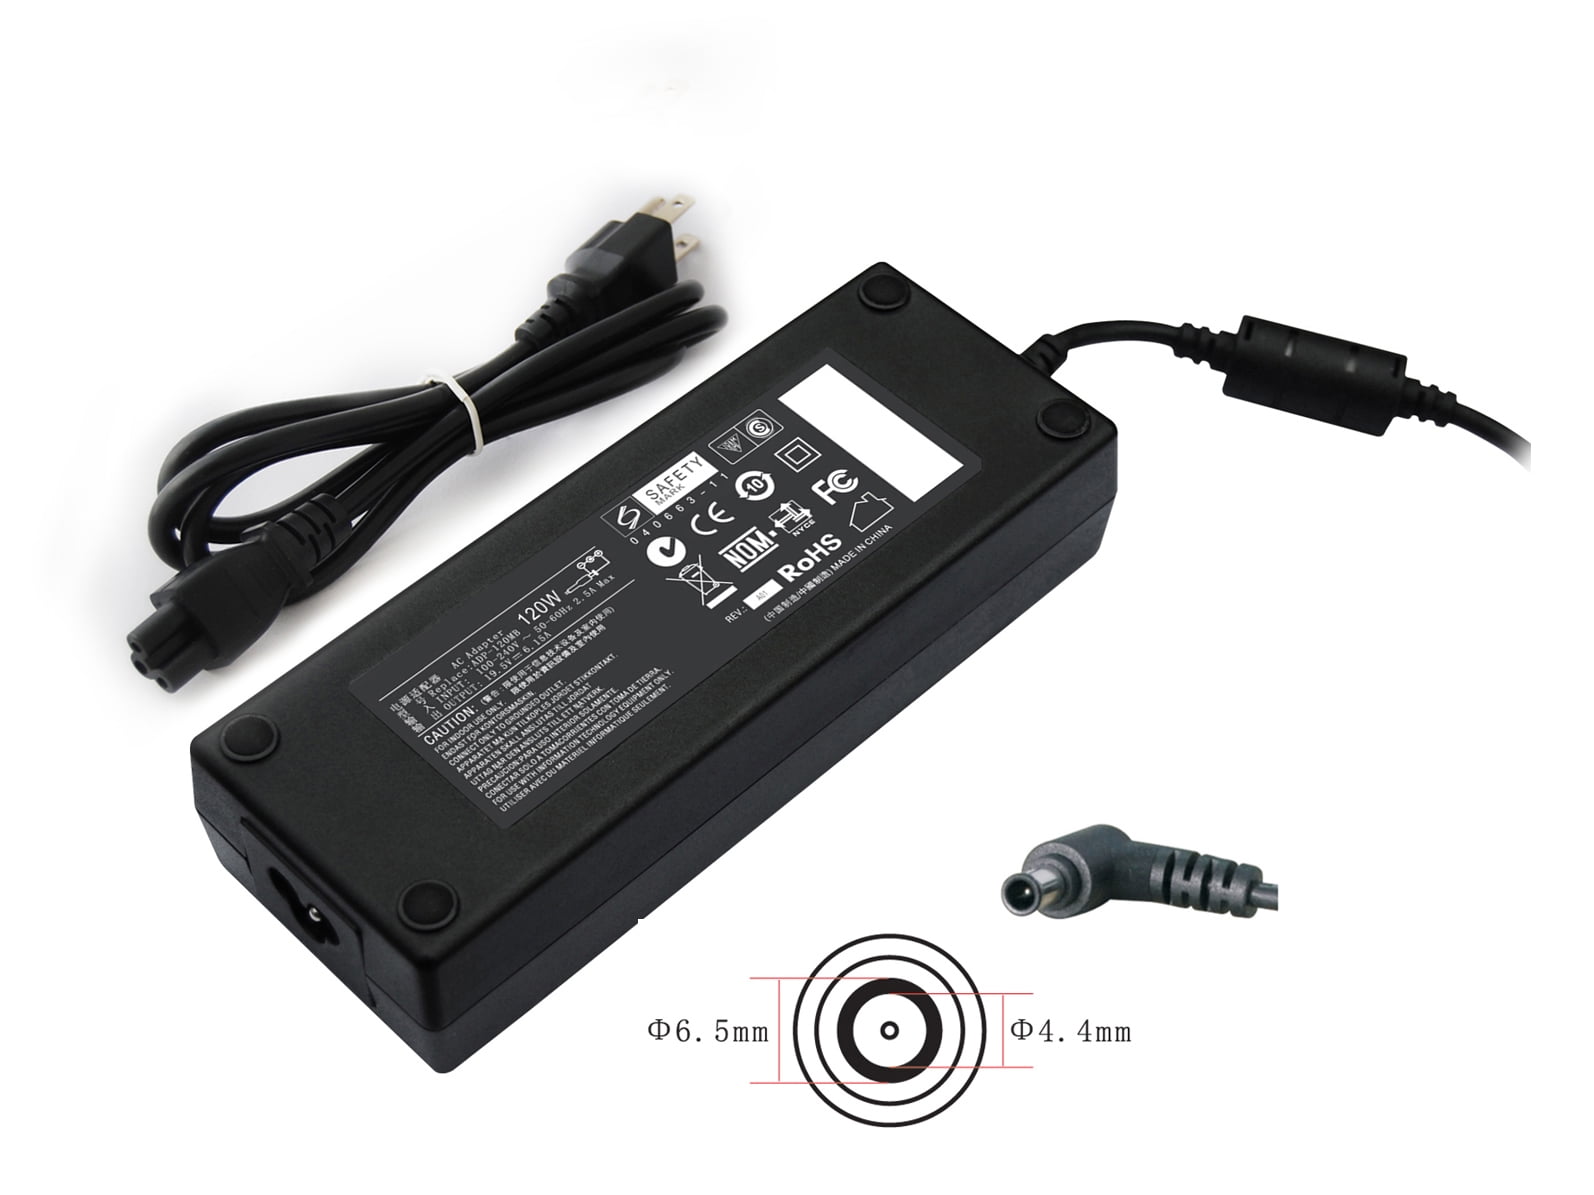 Original Genuine Sony Vaio VPCF Series Laptop Charger AC Adapter Power Supply